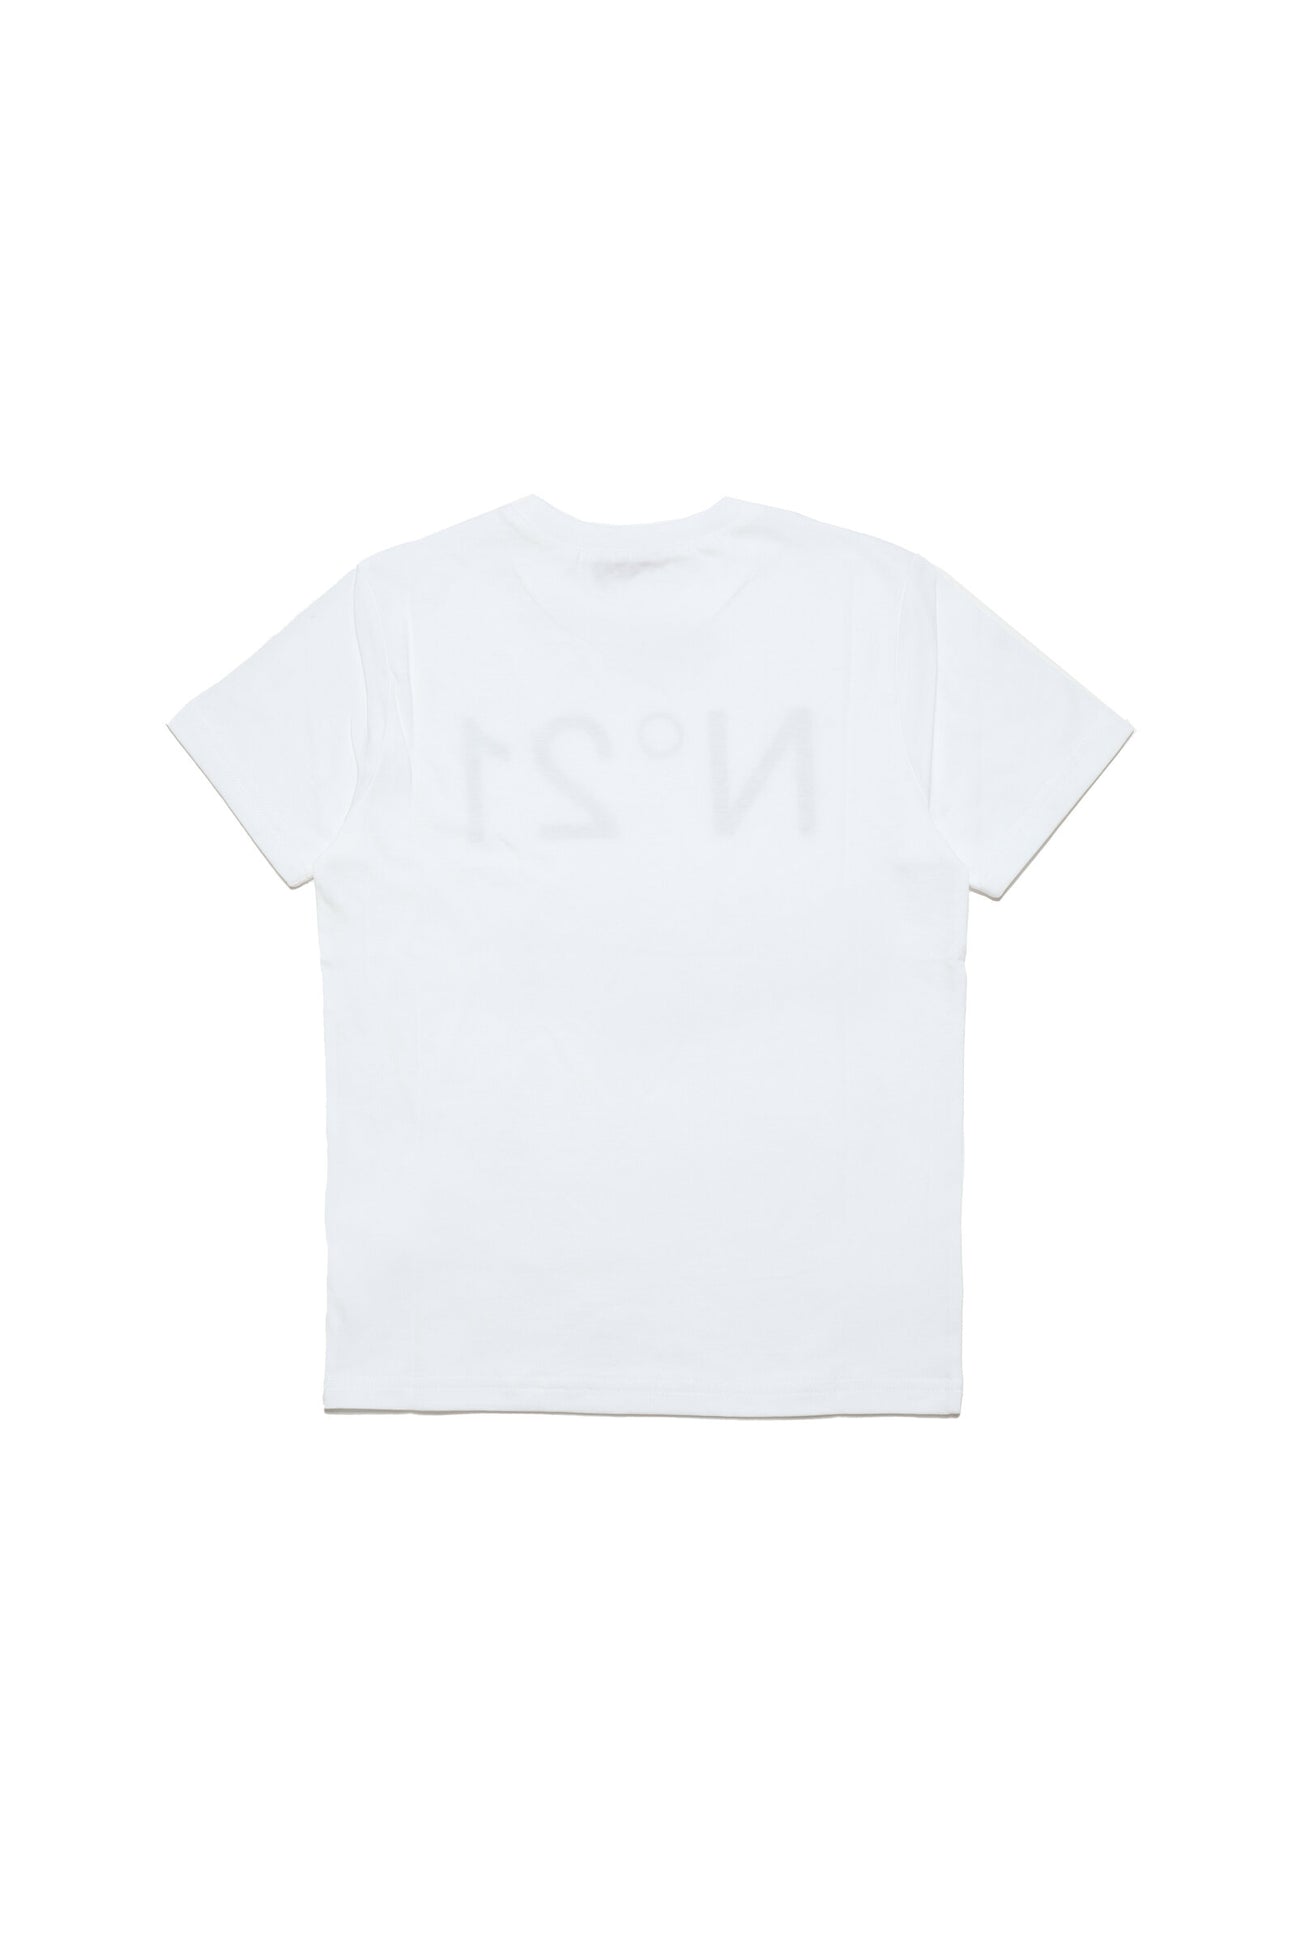 White jersey t-shirt with logo White jersey t-shirt with logo